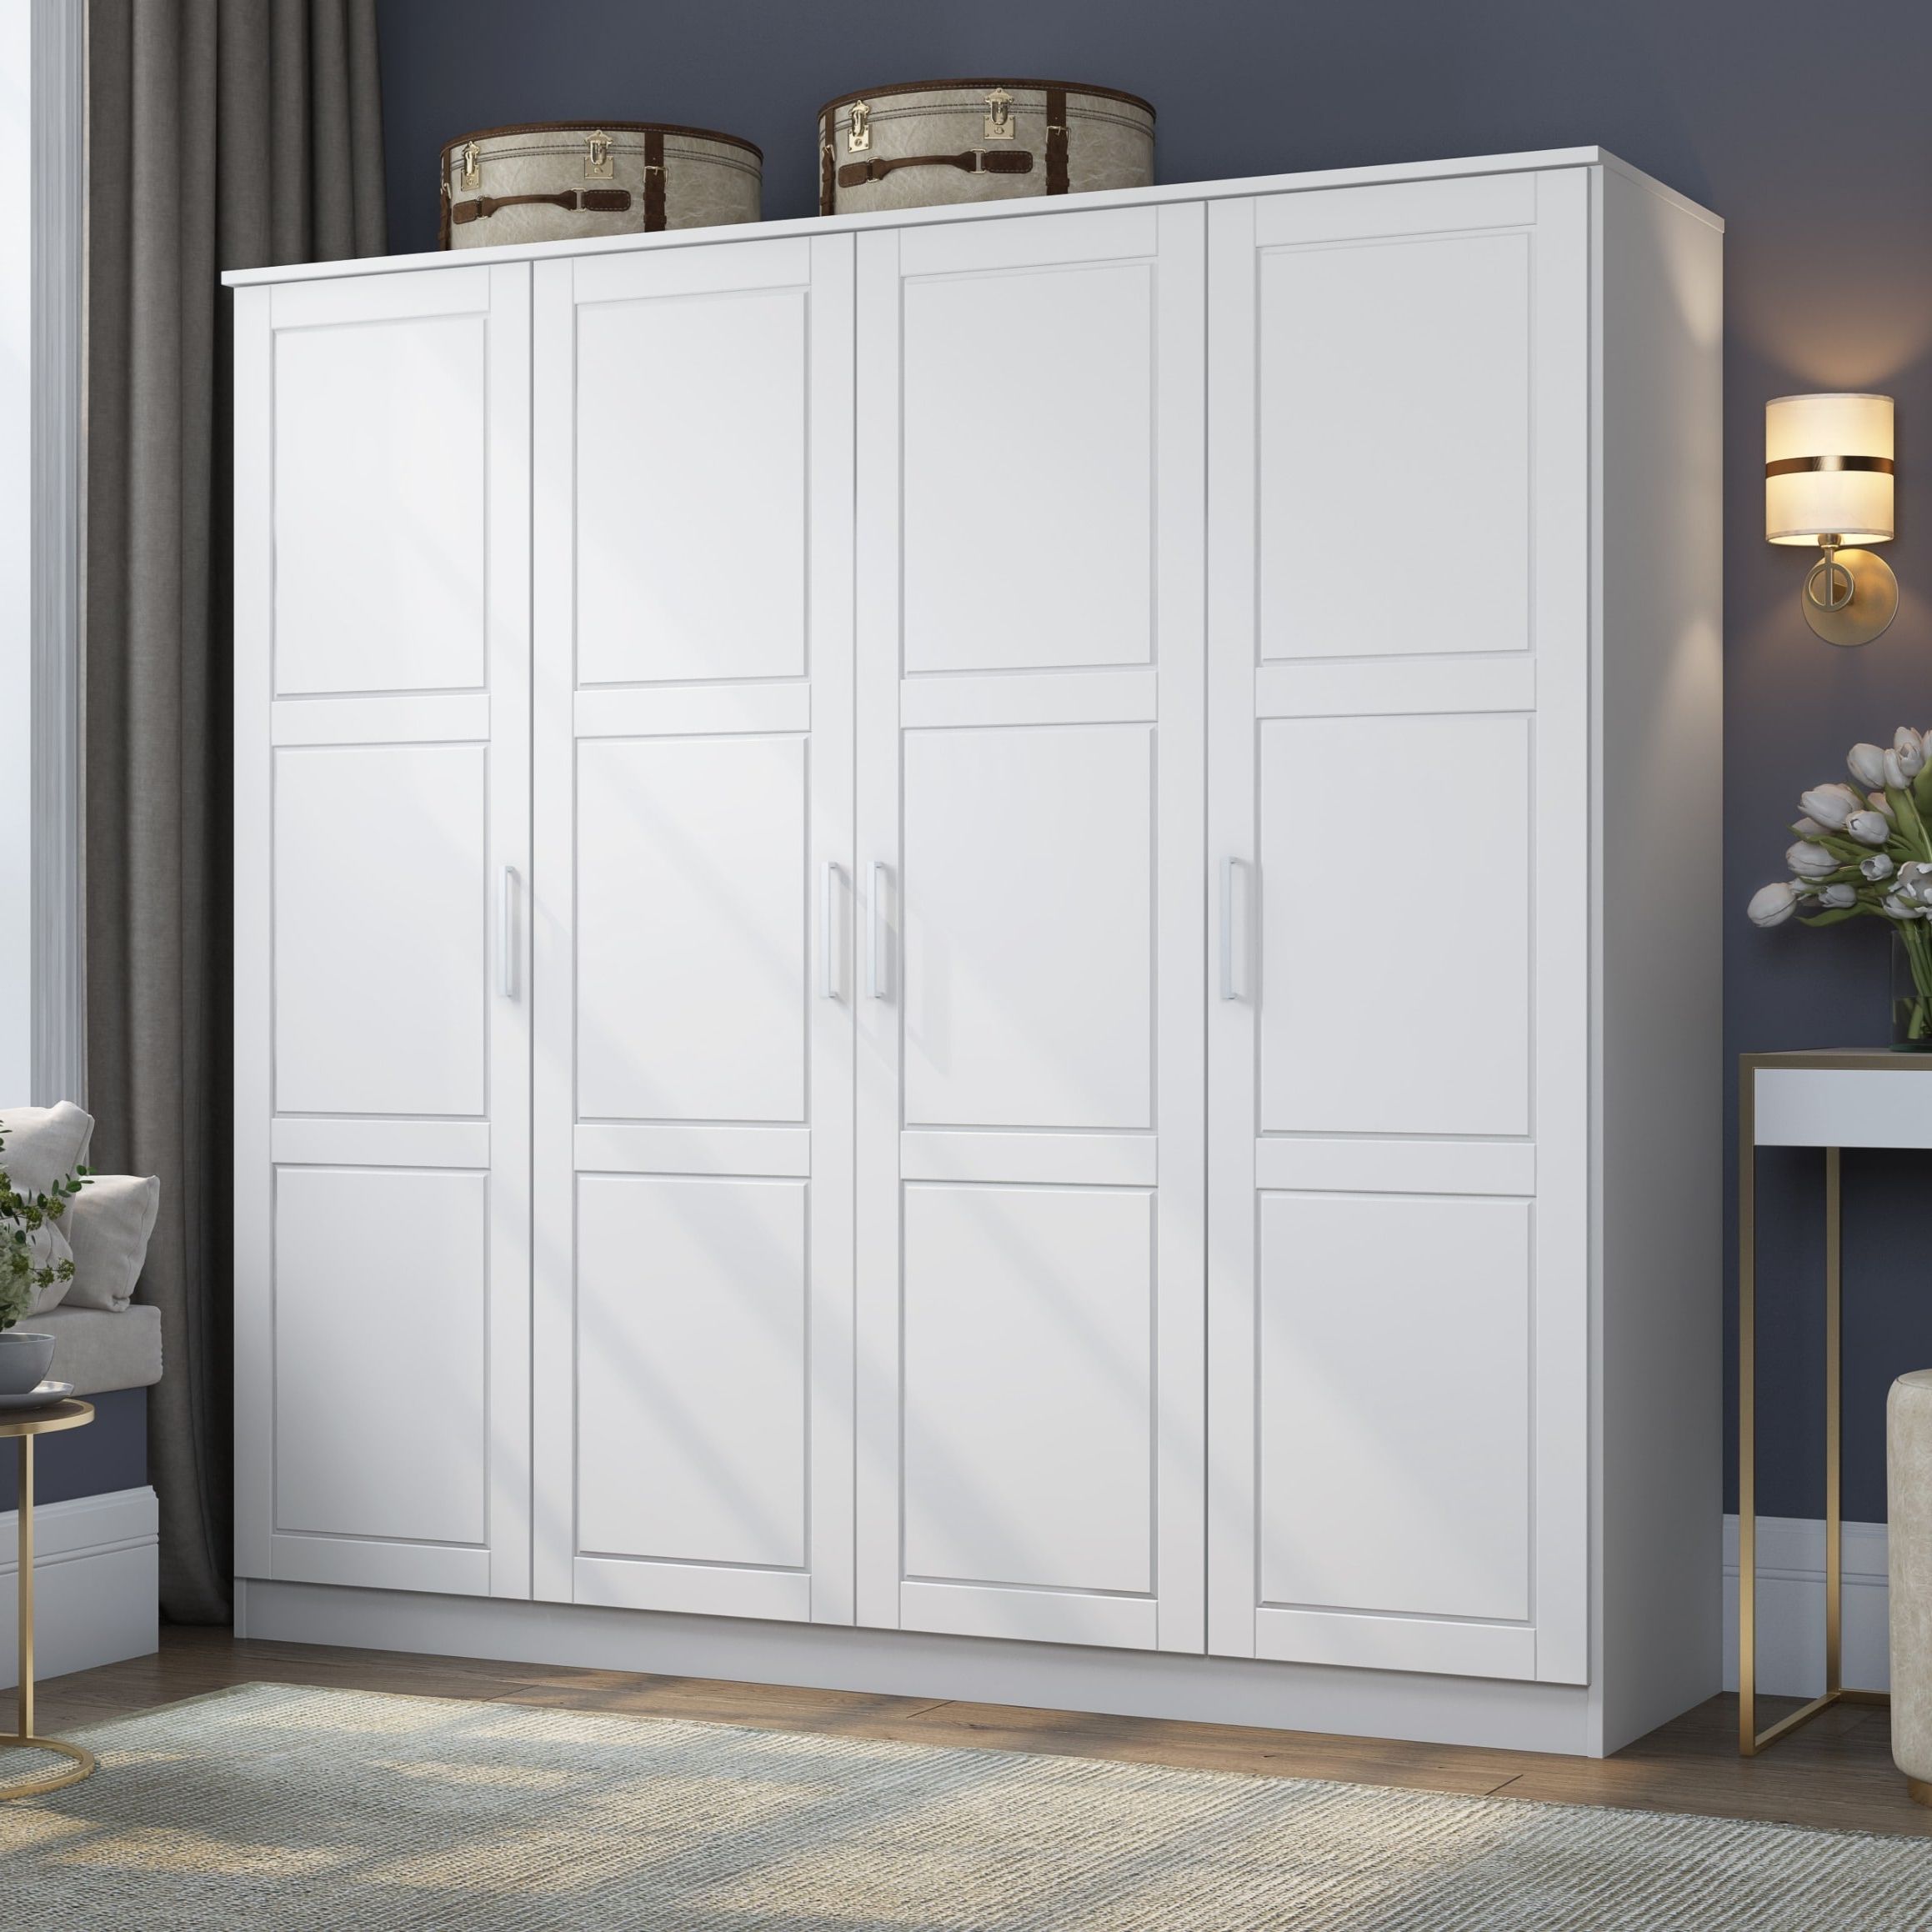 100% Solid Wood Cosmo 4 Door Wardrobe With Solid Wood Or Mirrored Doors –  On Sale – Bed Bath & Beyond – 37717187 Throughout 4 Door White Wardrobes (Gallery 13 of 20)